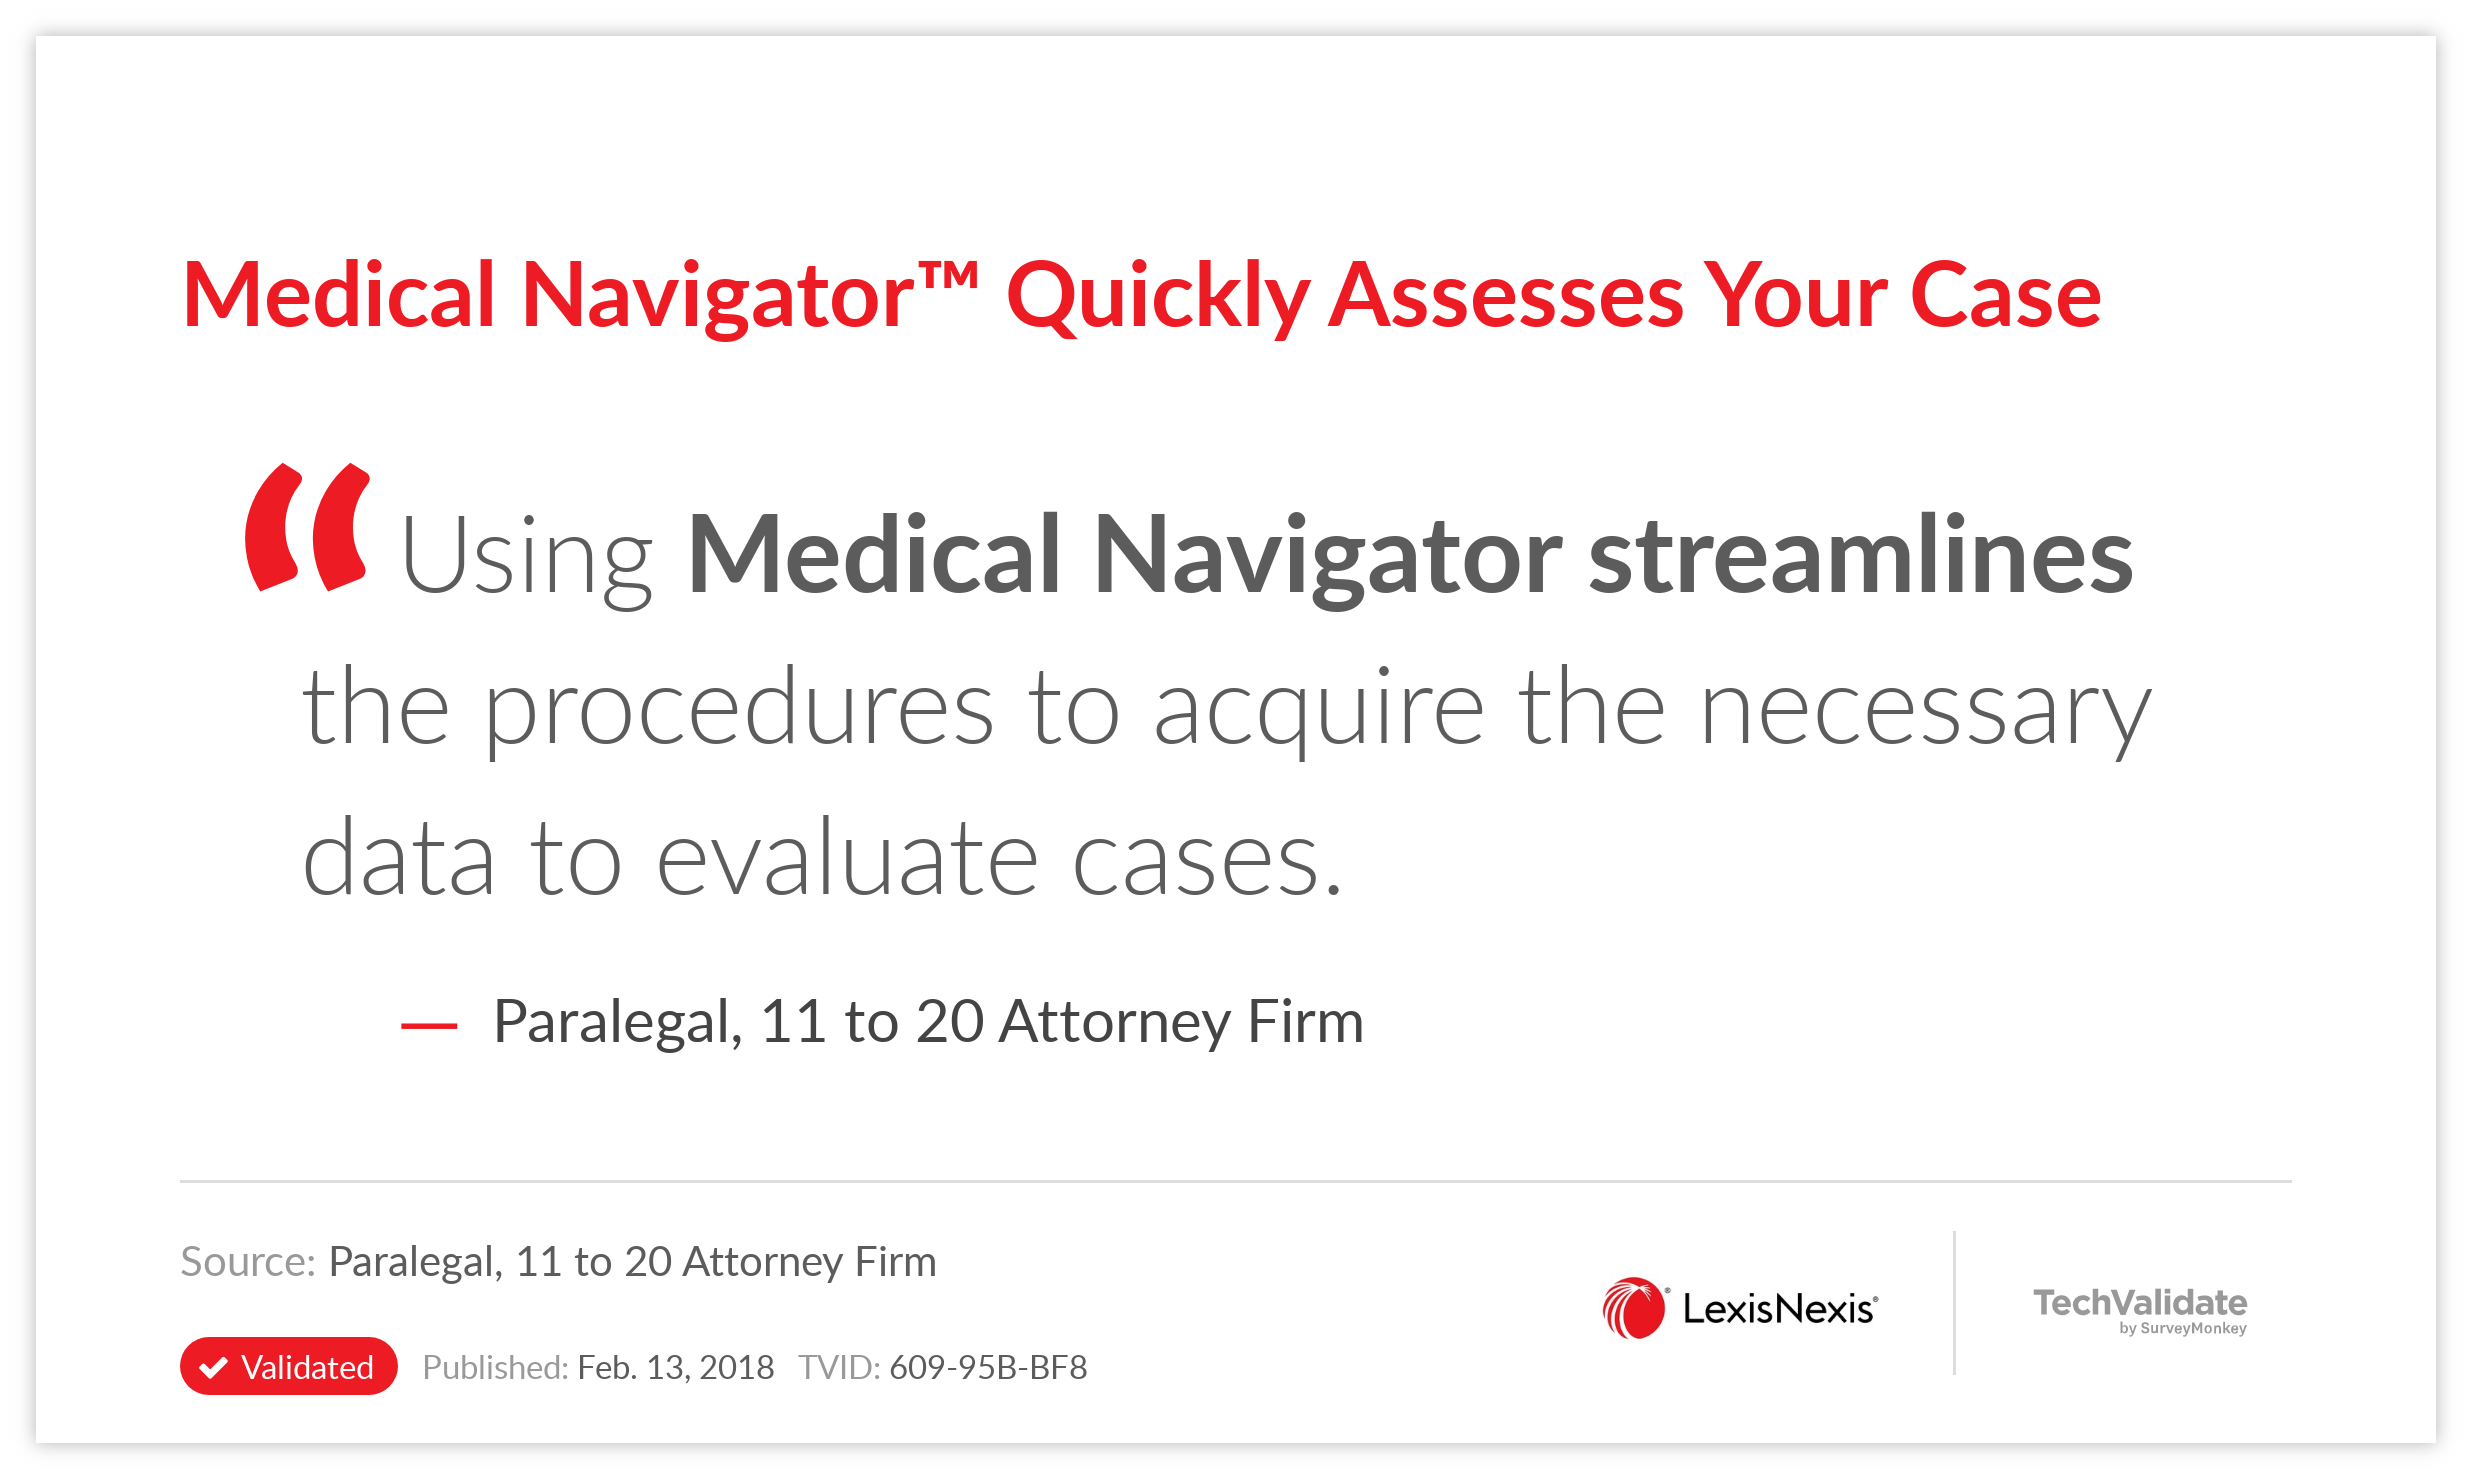 Medical Navigator(TM) Quickly Assesses Your Case